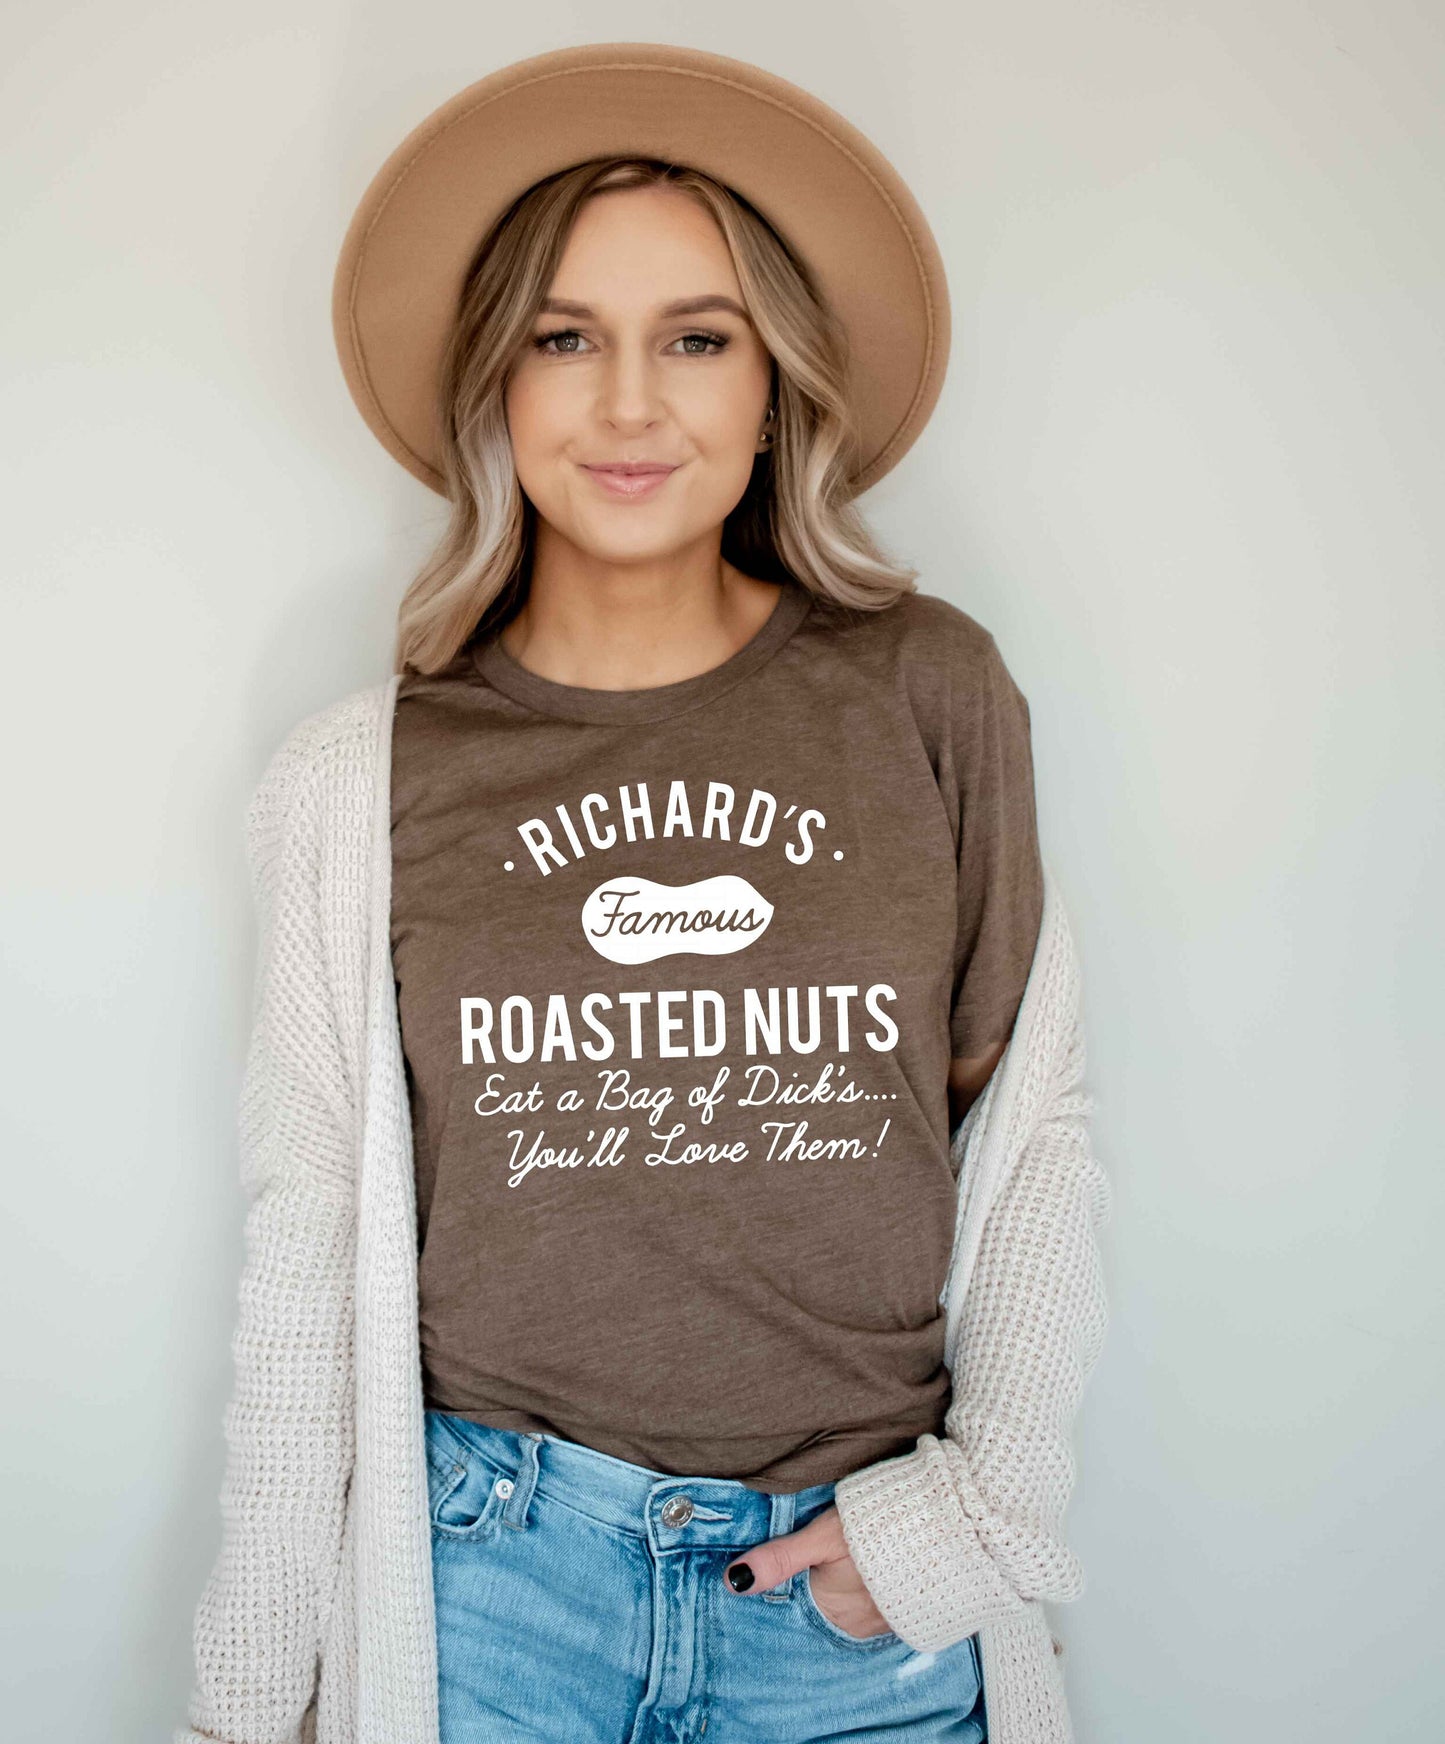 Richard's Famous Nuts Eat a Bag of Dicks Funny Unisex T-Shirt - Funny Shirt - Vintage Style Shirt